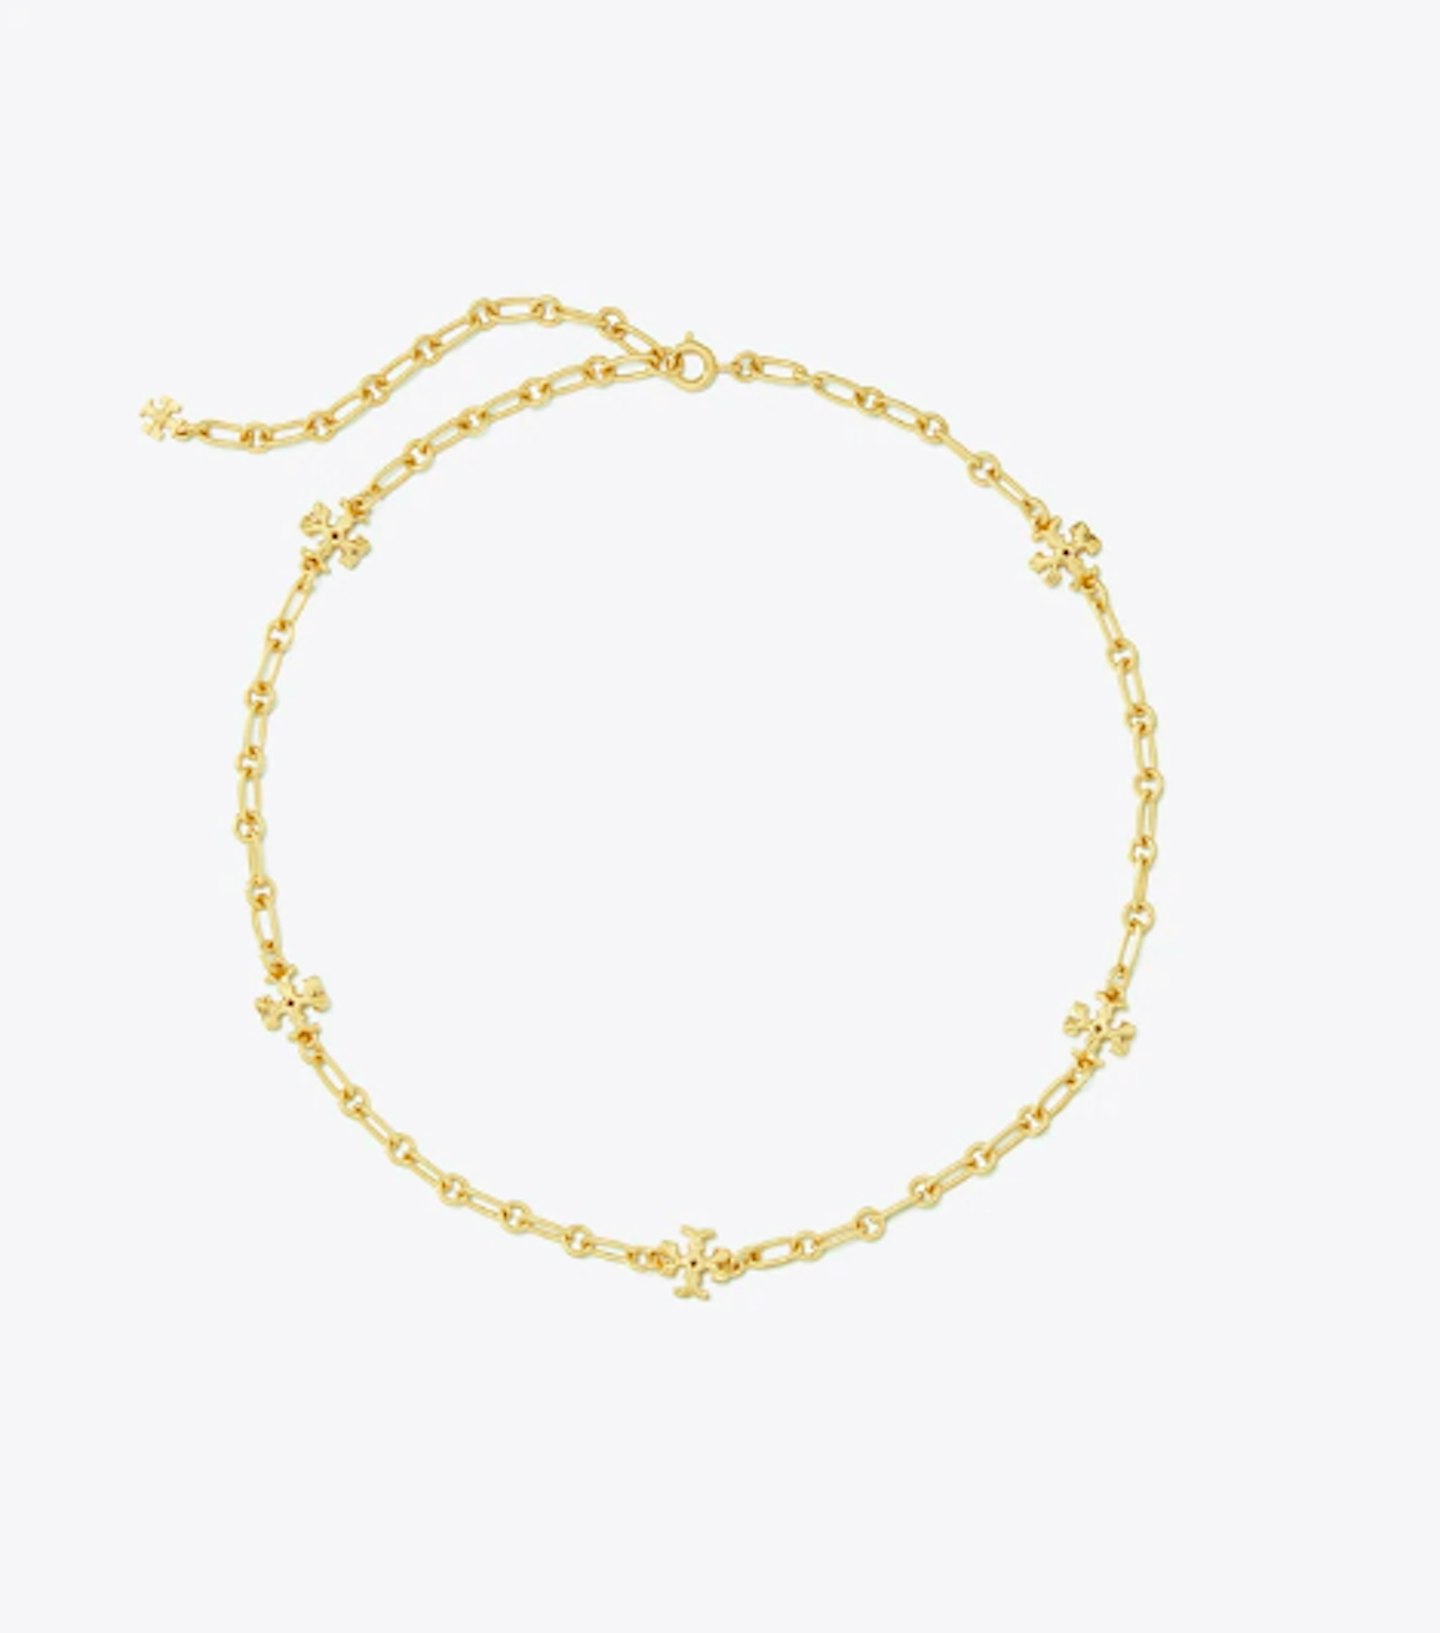 Tory Burch, Roxanne Chain Necklace